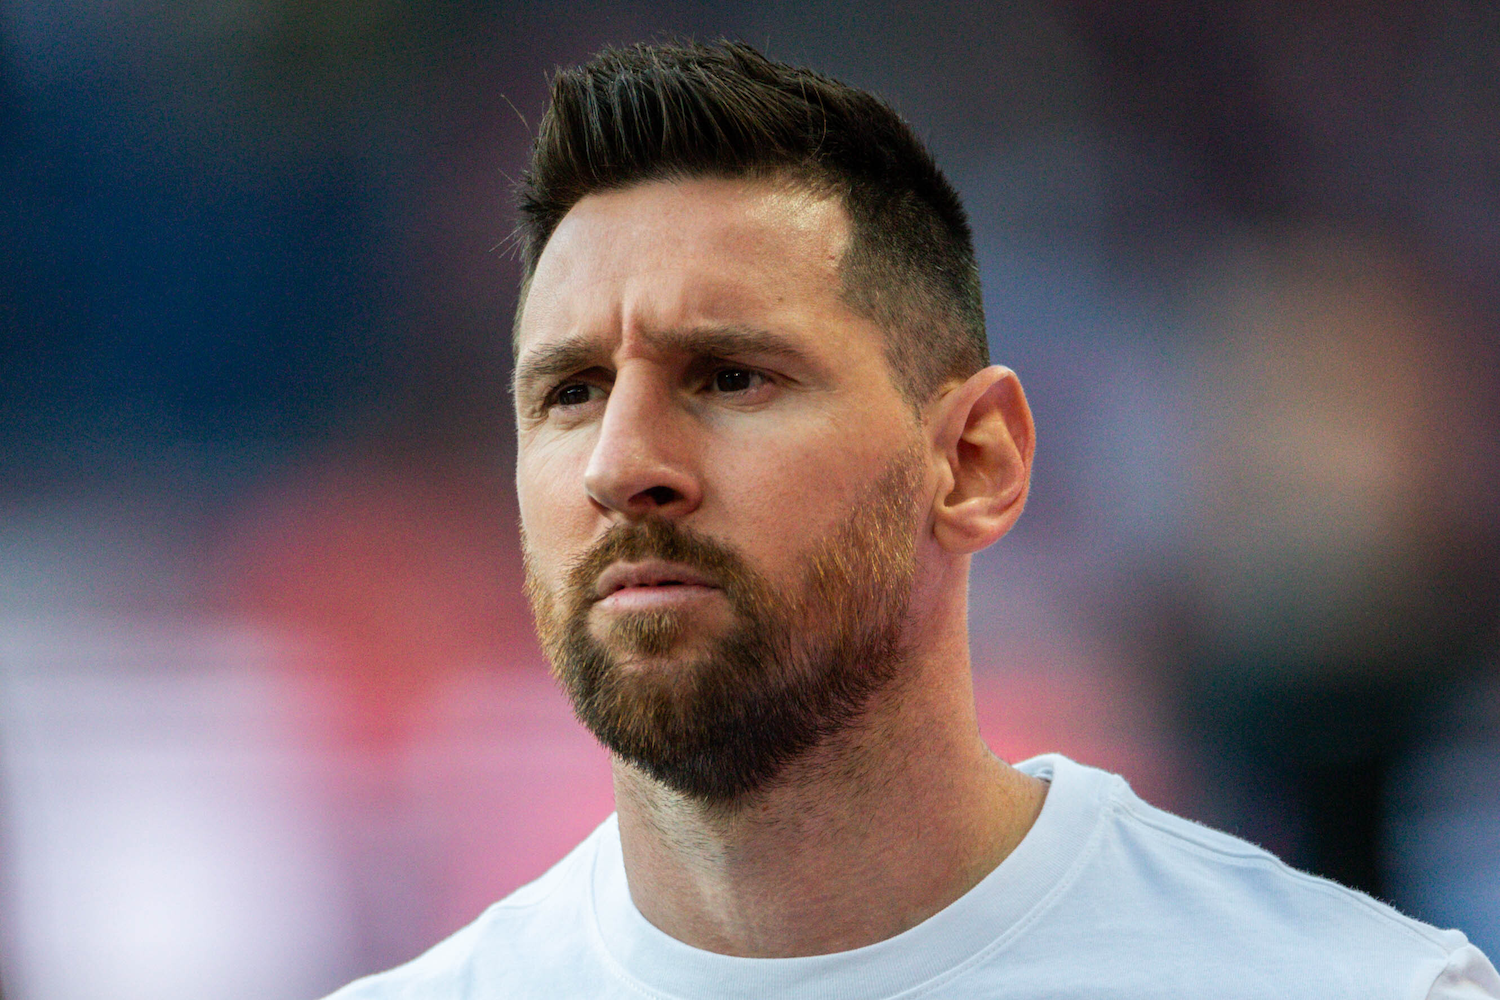 Lionel Messi, looking unhappy